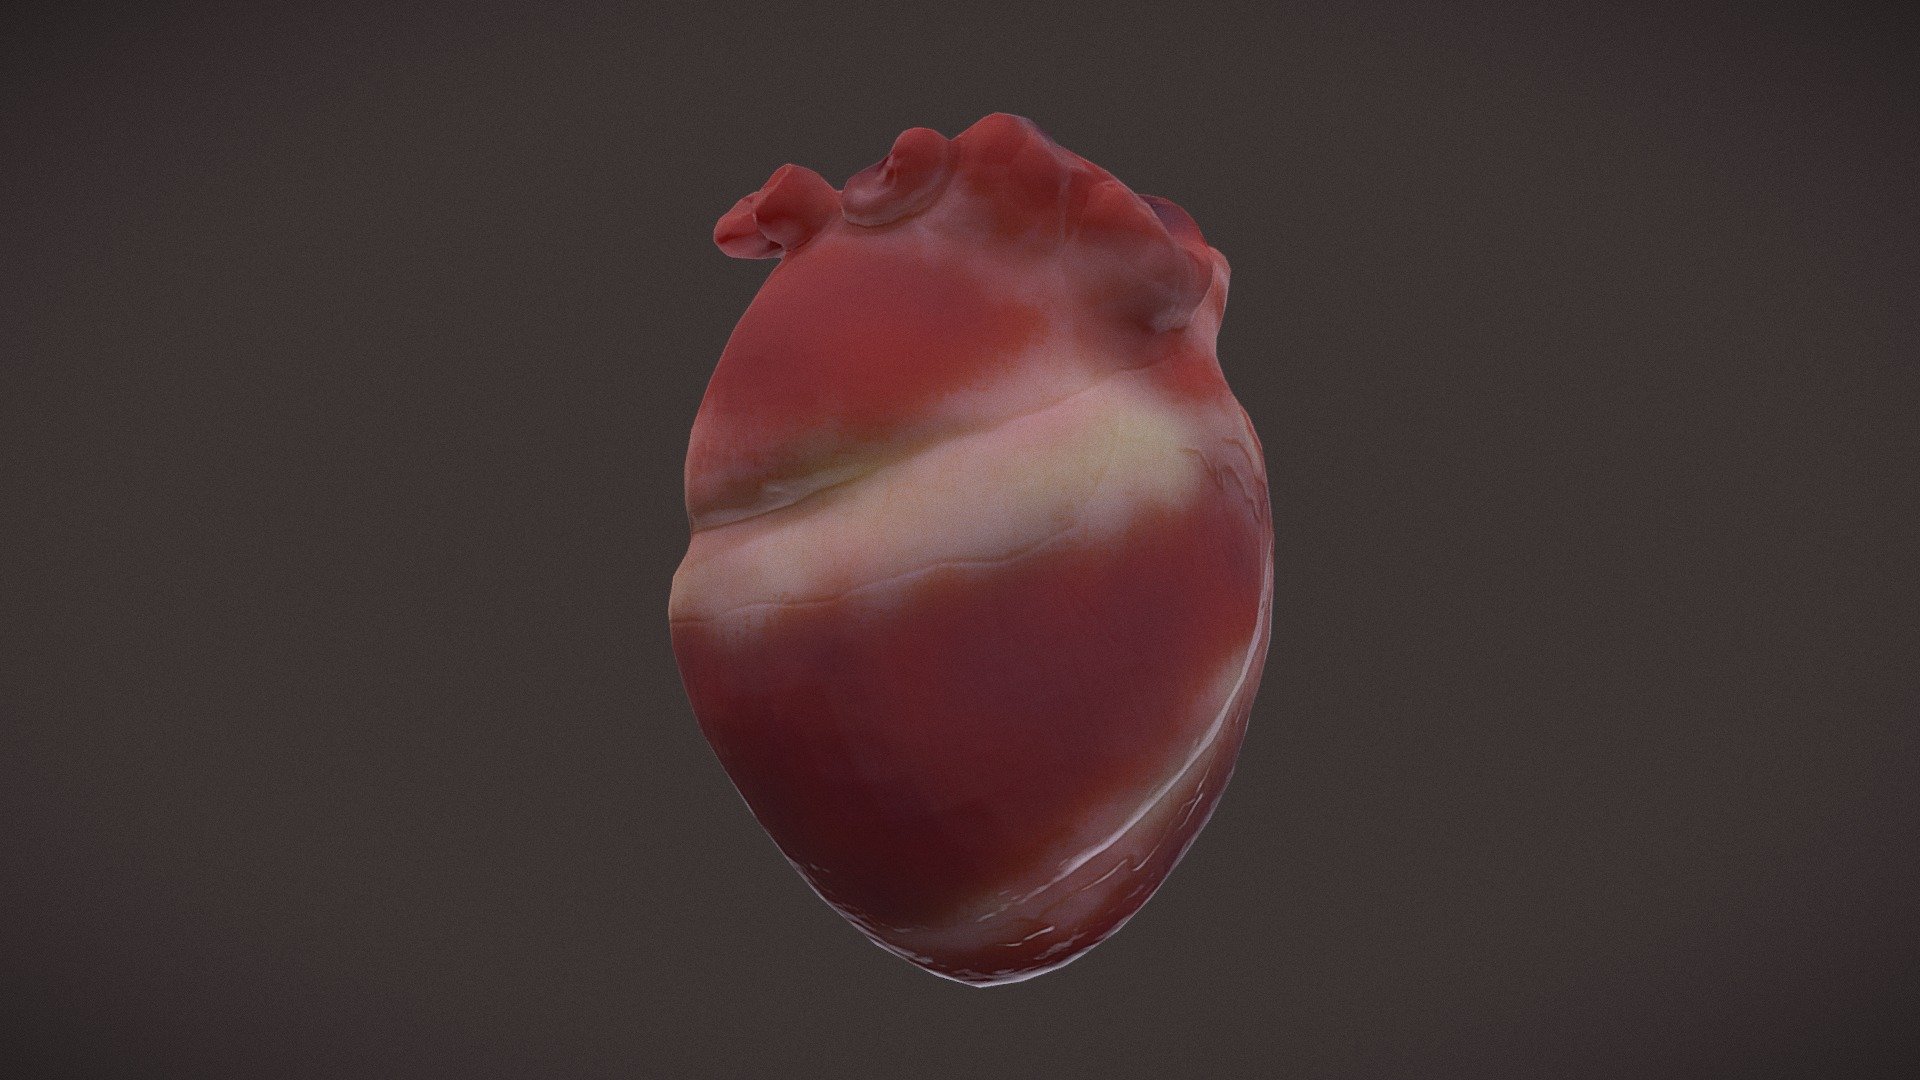 Maps Included: BaseColor Metallic Roughness Normal Height Customer Service Guaranteed. From the Creators at Get Dead Entertainment Please Like and Rate! :) - Human Heart - Buy Royalty Free 3D model by GetDeadEntertainment 3d model